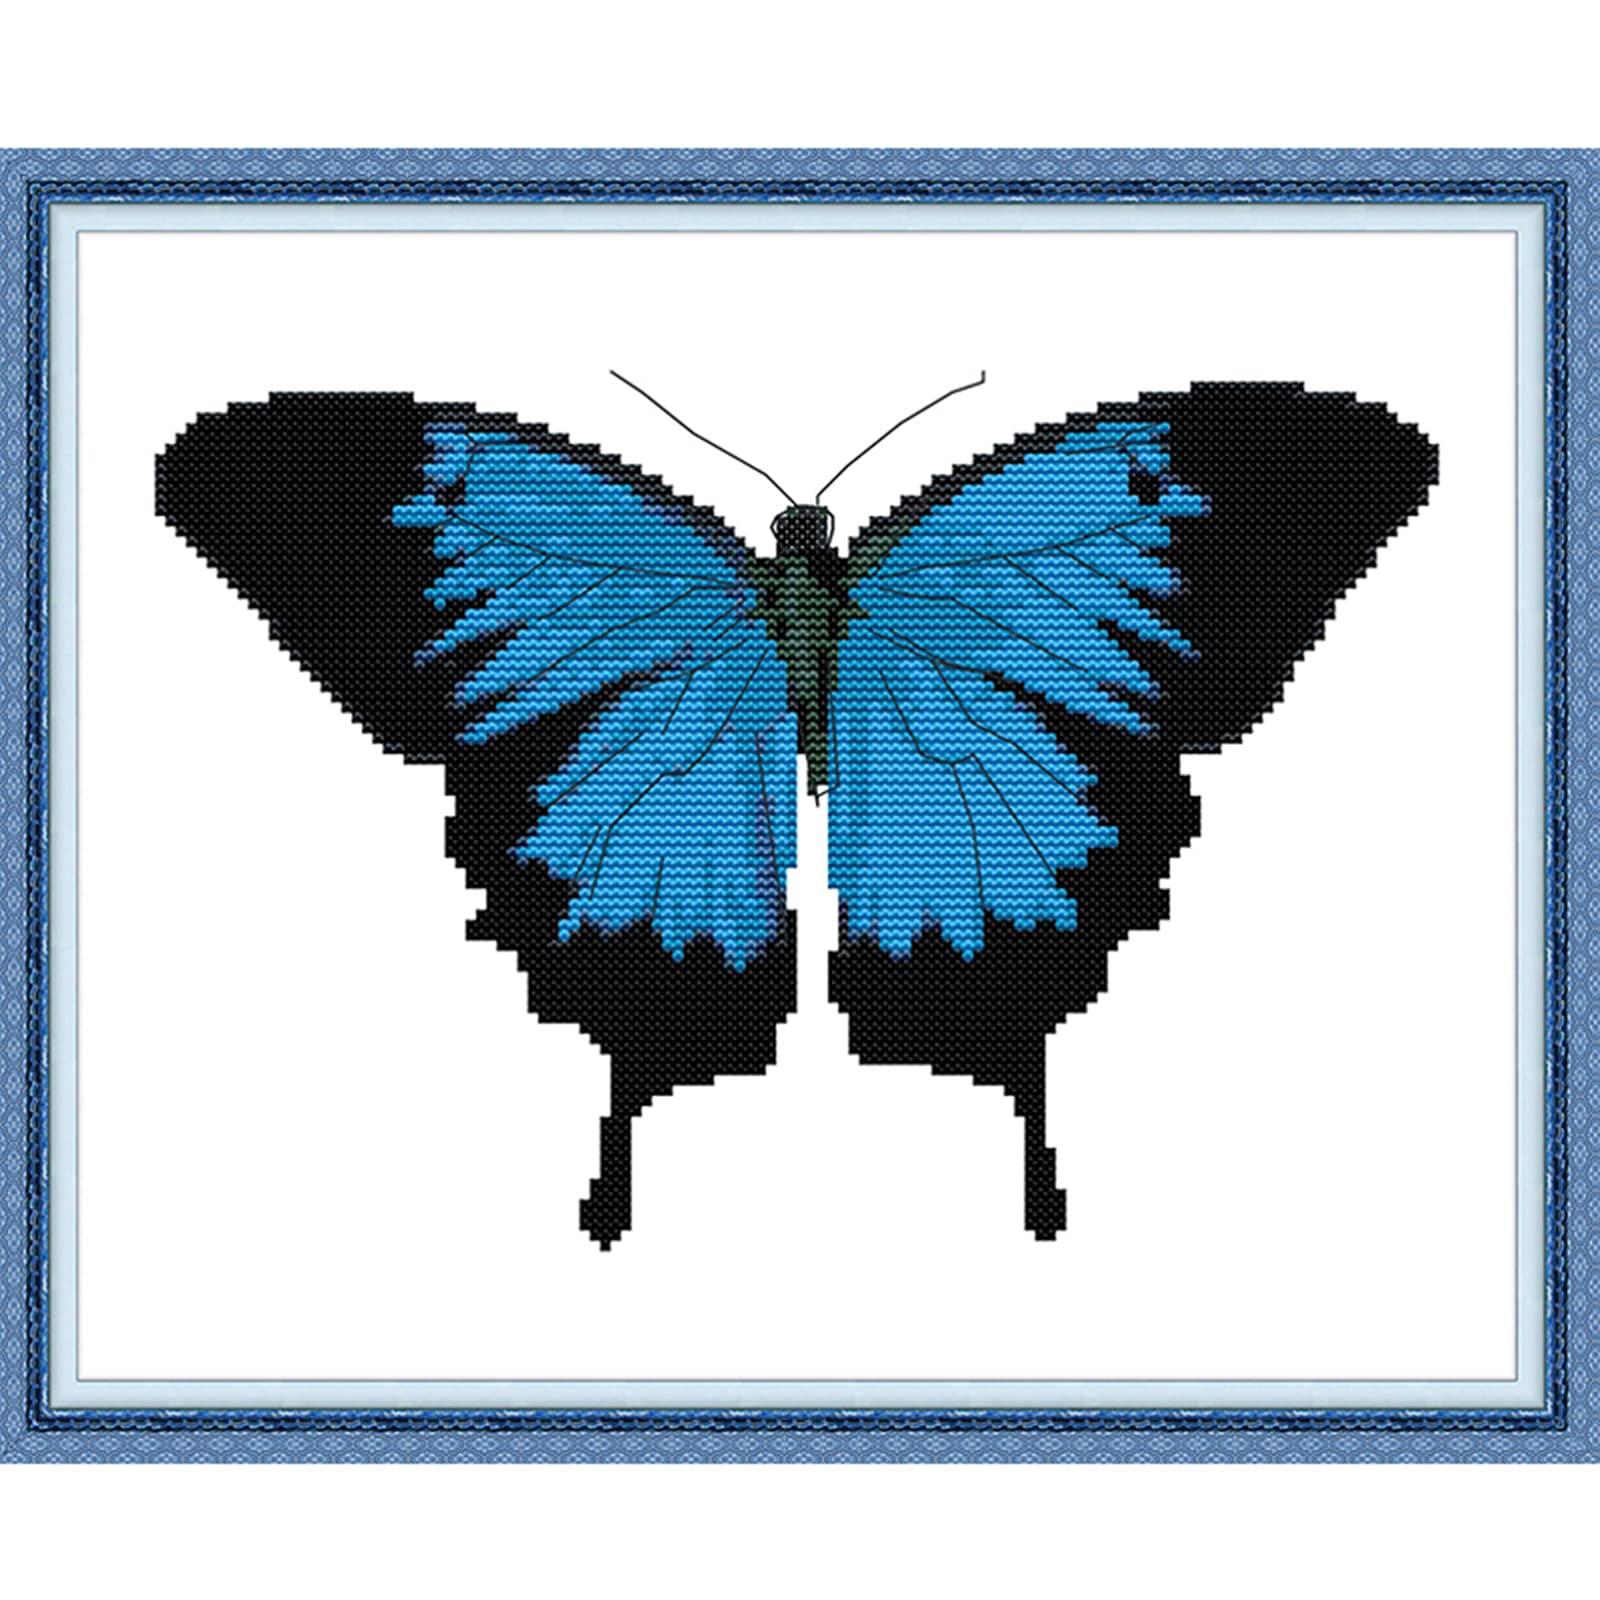 Stamped Cross Stitch Kits Full Range of Crossstitching Kits Preprinted Easy  Patterns Embroidery kit for Beginner Printed Cross-Stitch for Home Decor  11CT 3 Strands-Ulysses Butterfly 16x13.8(inch)